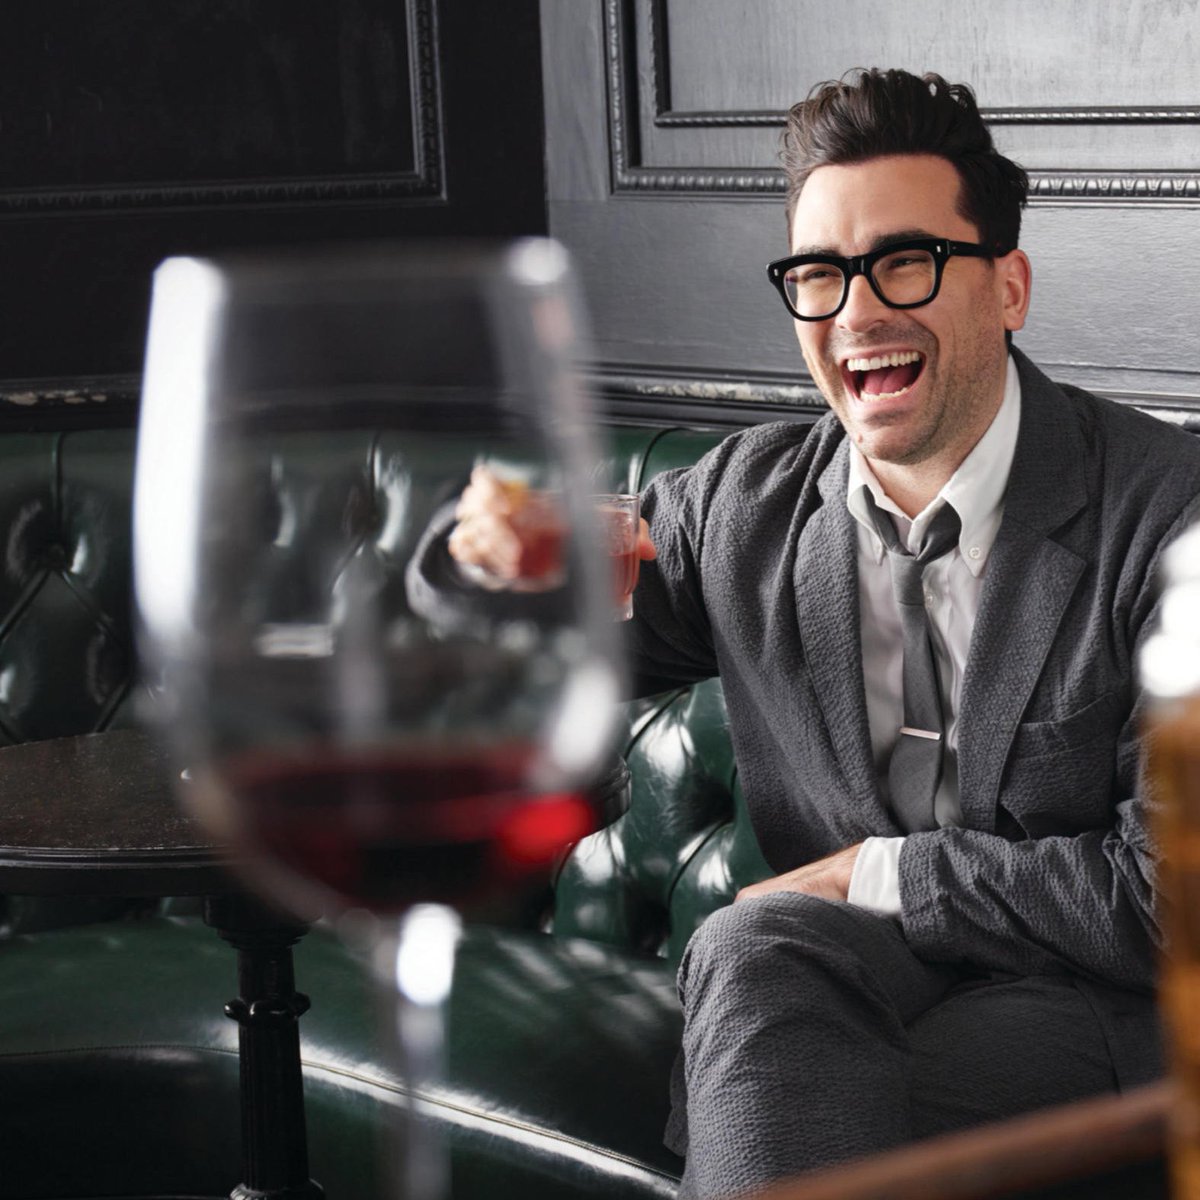 Dan Levy, but each time his smile gets a little bigger